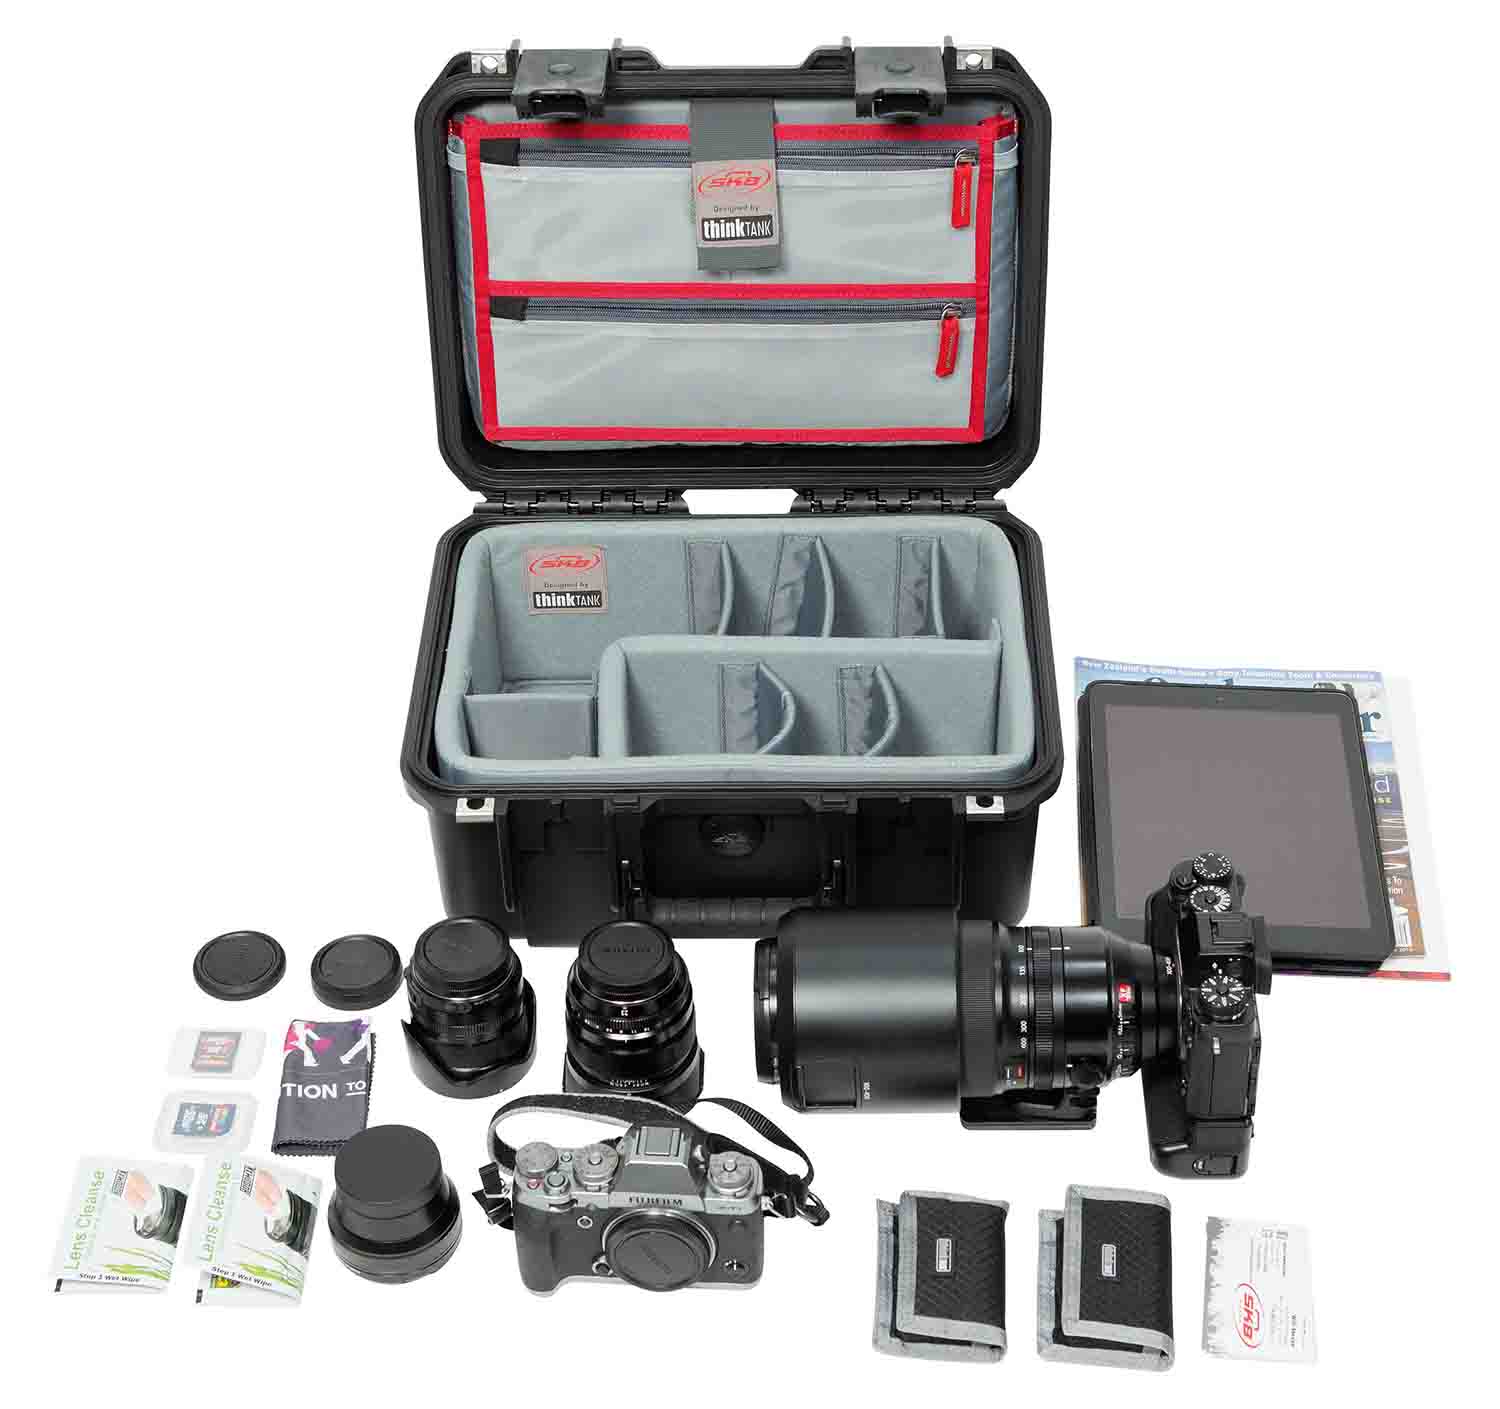 SKB Cases 3i-1309-6DL Case with Think Tank Photo Dividers and Lid Organizer - Black - Hollywood DJ